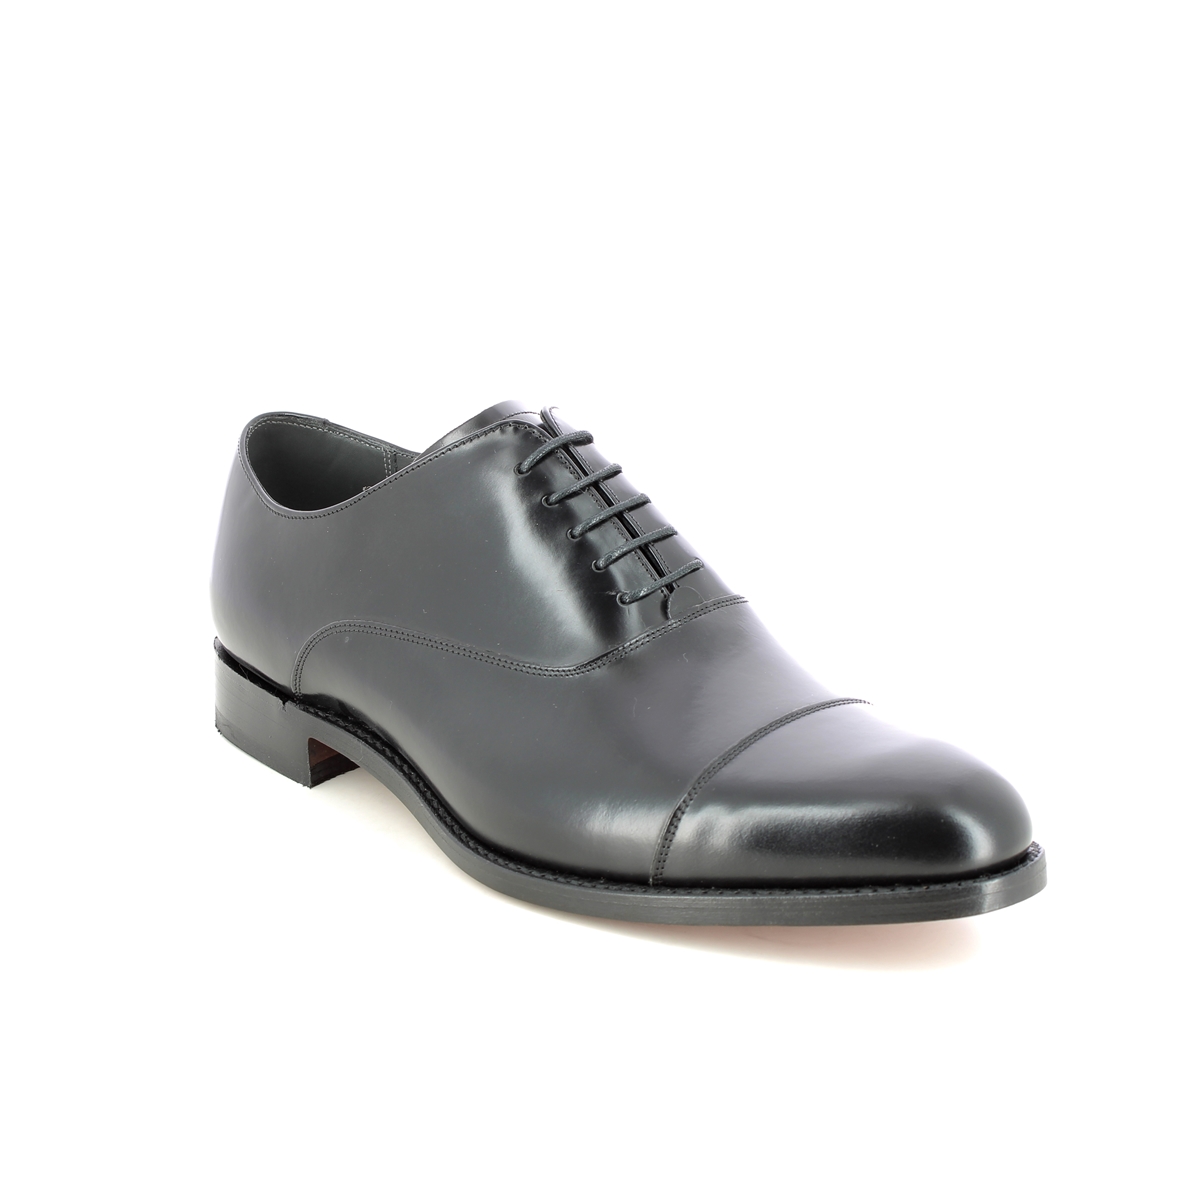 Barker Winsford Cap Black leather Mens formal shoes 3945-17G in a Plain Leather in Size 8.5